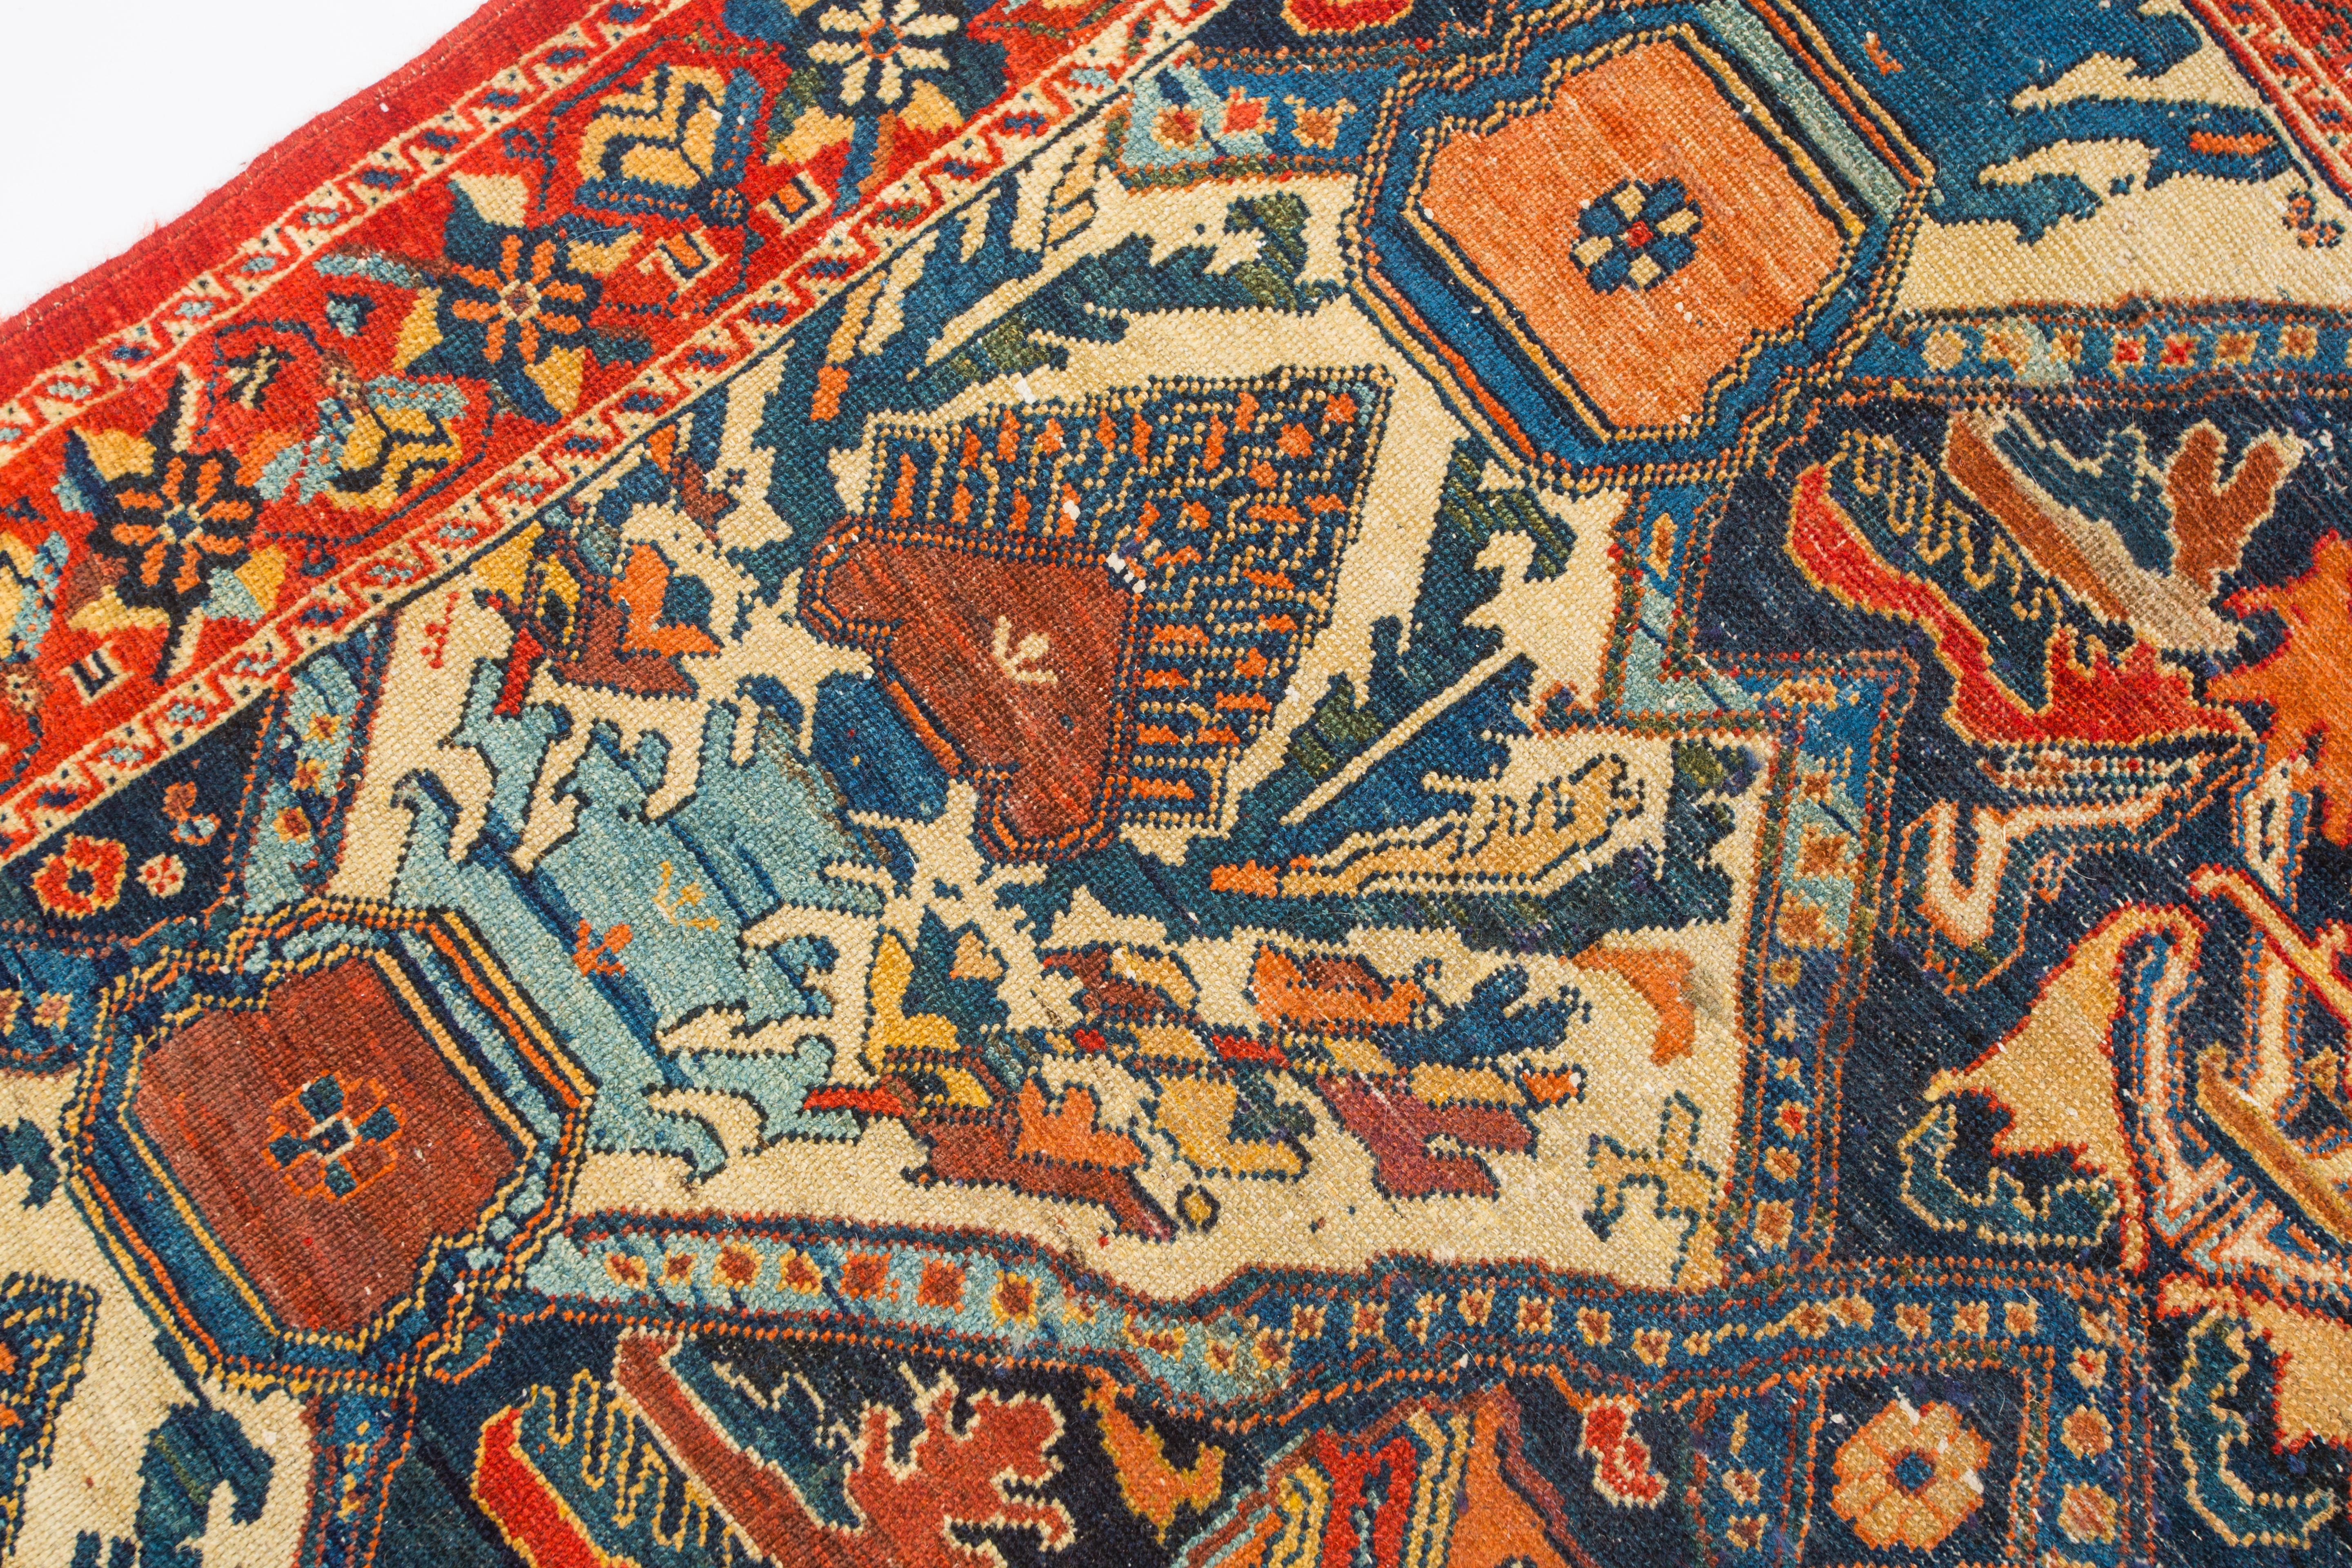 Late 19th Century Astonishing 19th Century Rare Afshar Tribal rug  featured in famous book  For Sale